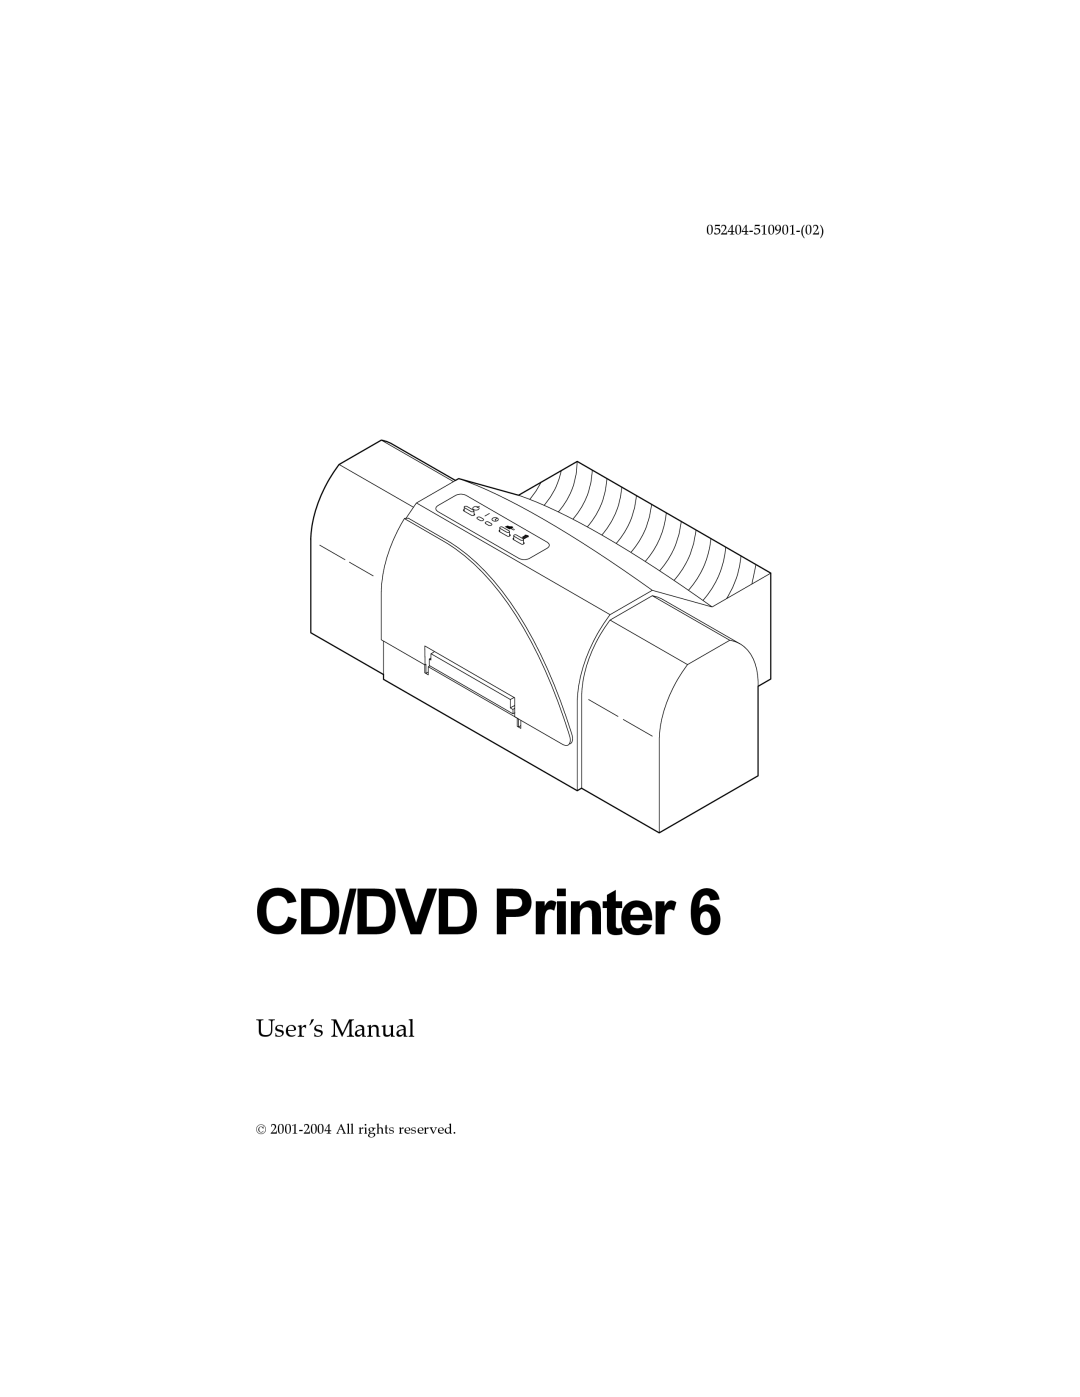 Primera Technology 6 user manual CD/DVD Printer, User’s Manual, 052404-510901-02, All rights reserved 